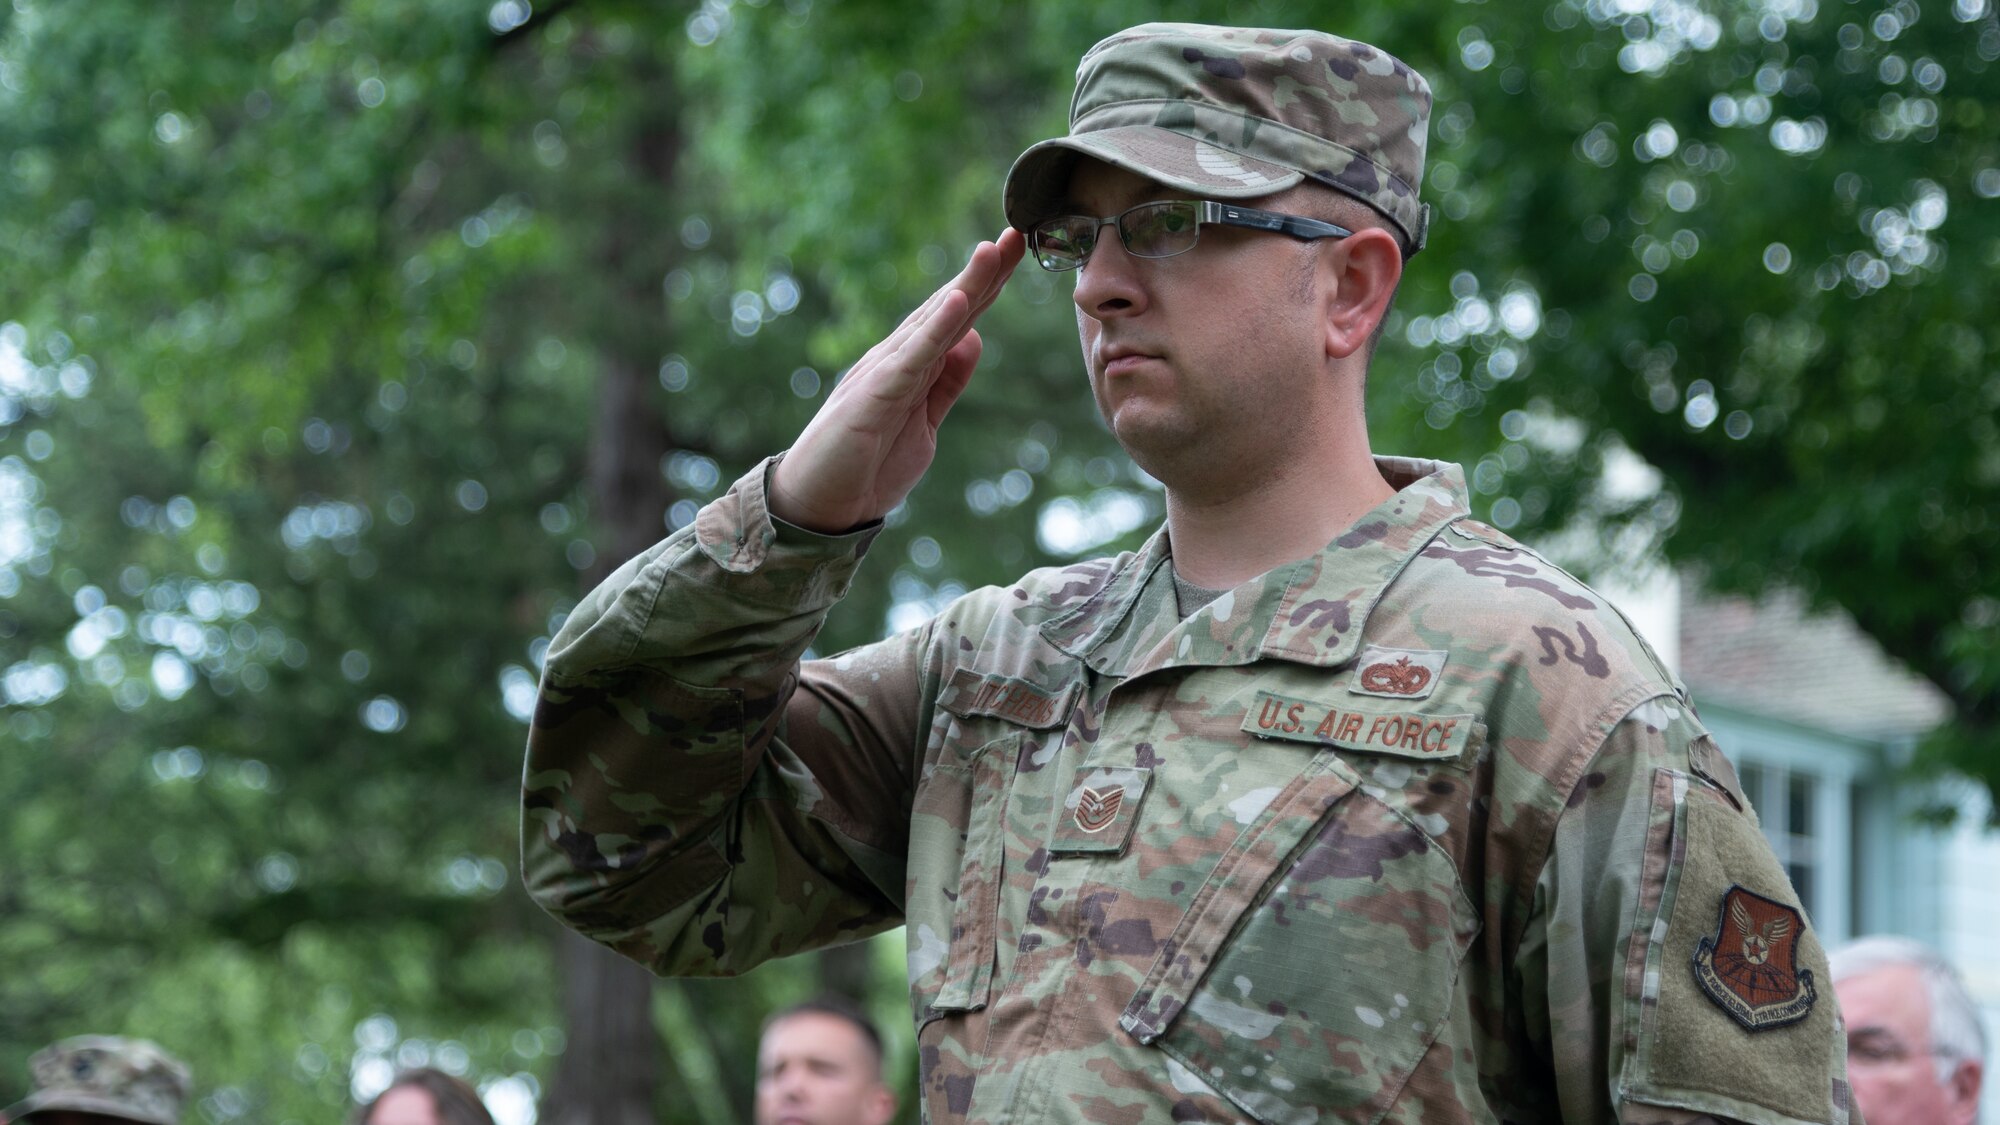 Tech. Sgt. Brandon Kitchens, 2nd Maintenance Squadron NCO in charge of maintenance flight, salutes while the National Anthem plays at Barksdale Air Force Base, June 8, 2021. Kitchens crafted the new Barksdale community book exchange box with materials donated by the Every Warrior Network.